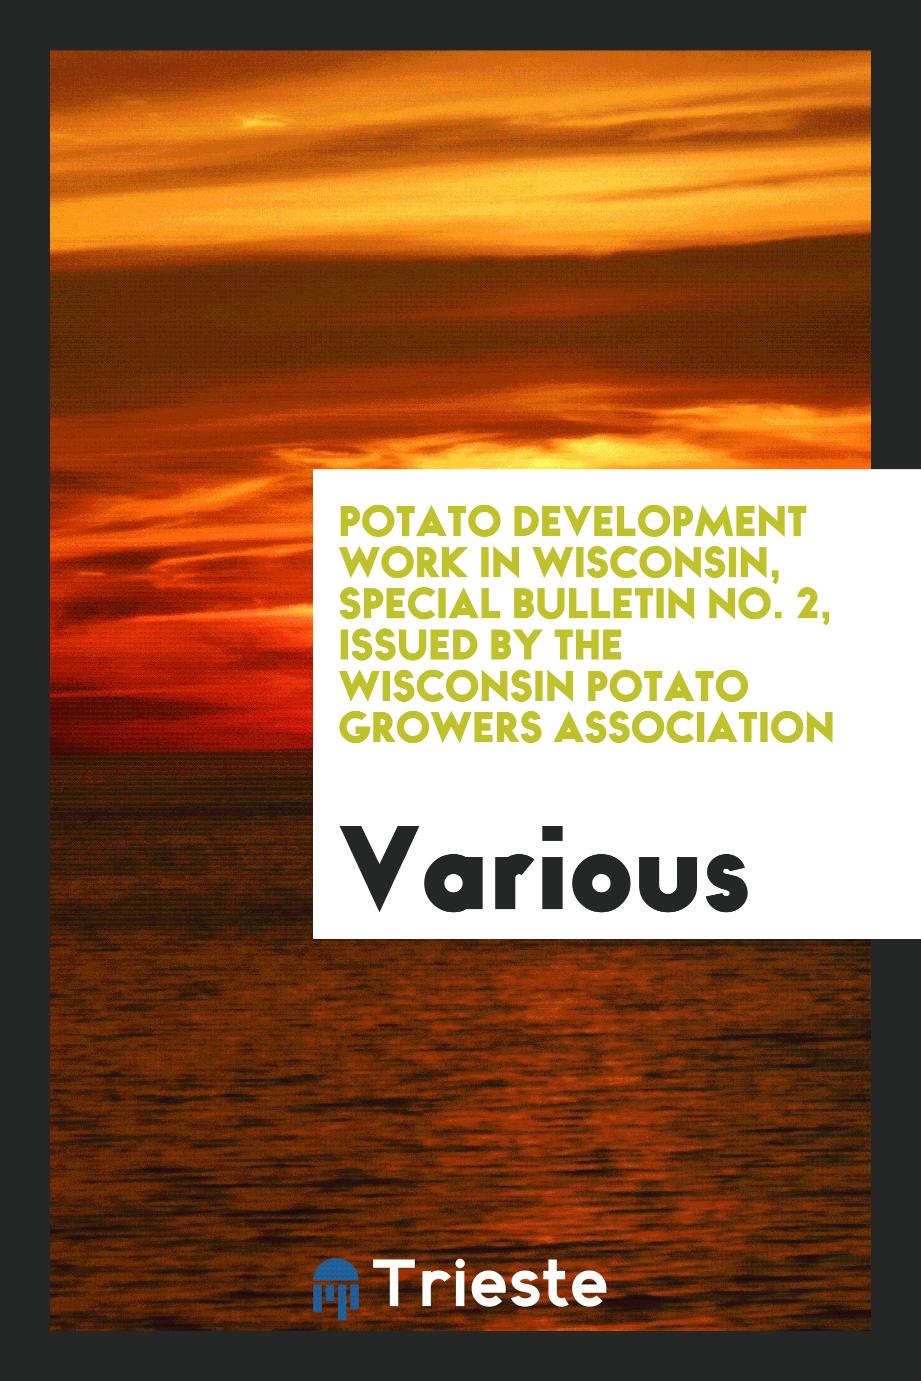 Potato Development Work in Wisconsin, Special Bulletin No. 2, Issued by the Wisconsin Potato Growers Association